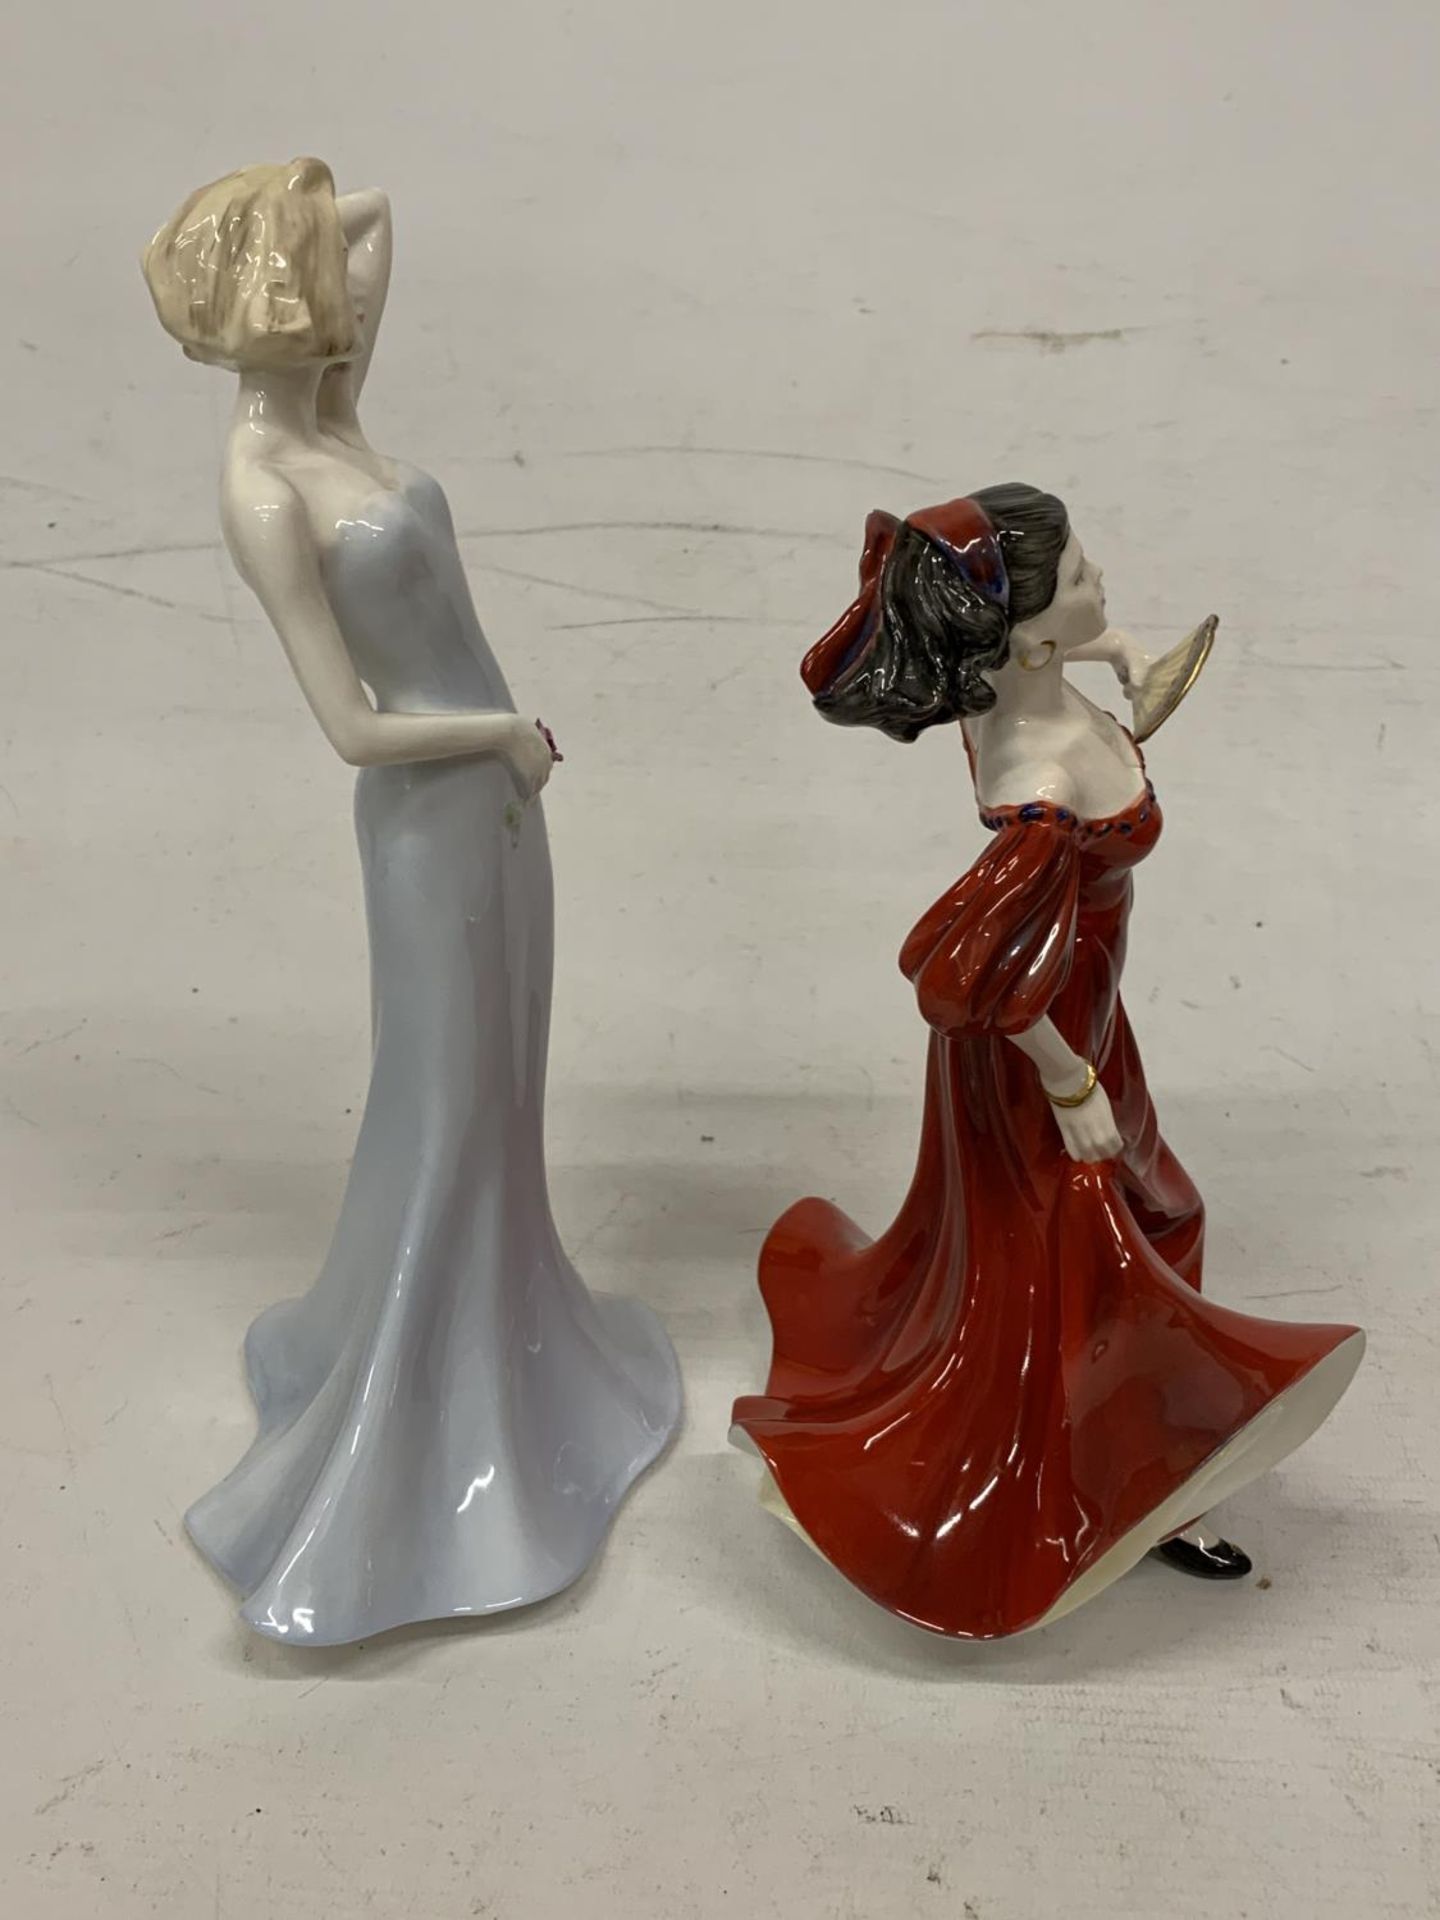 TWO COALPORT FIGURINES - SILHOUETTES "GILLIAN" AND LADIES OF FASHION "ROMANY DANCE" - Image 2 of 4